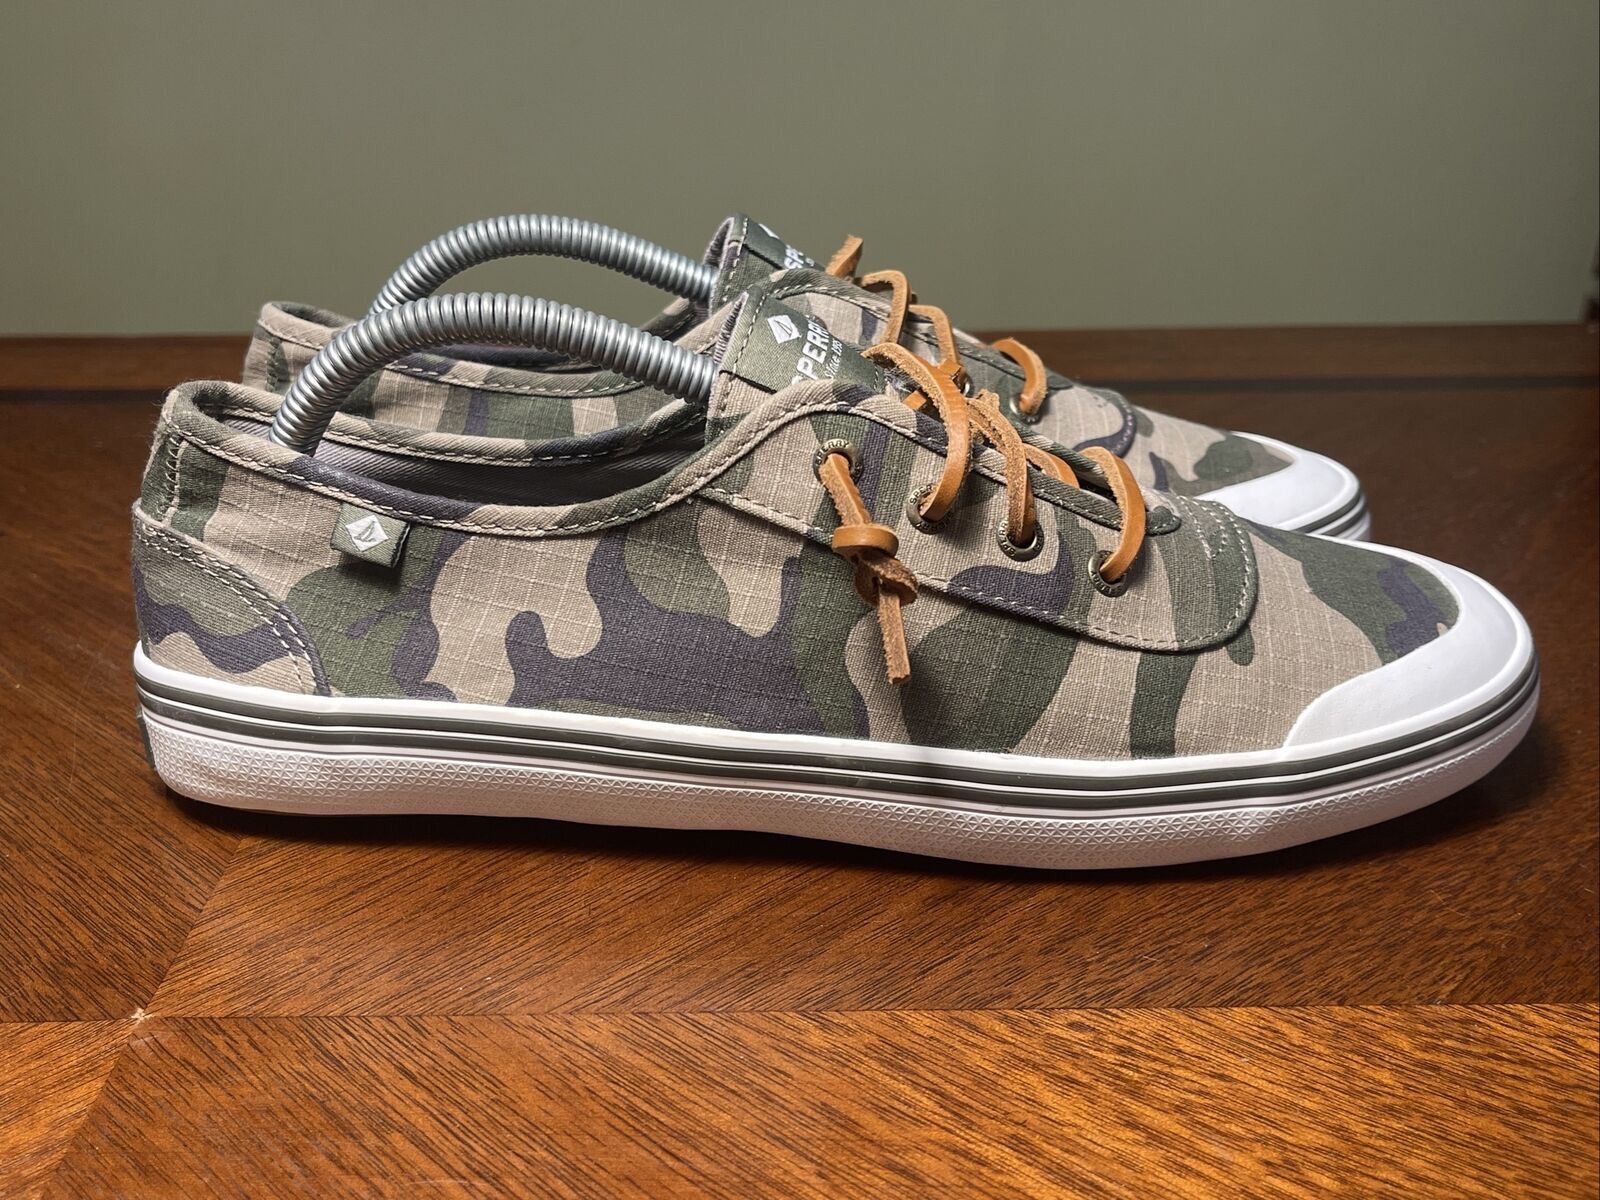 Sneakers Lace Up Slip On Camo Shoes Womens Sz 11 for Sale in Oklahoma ...